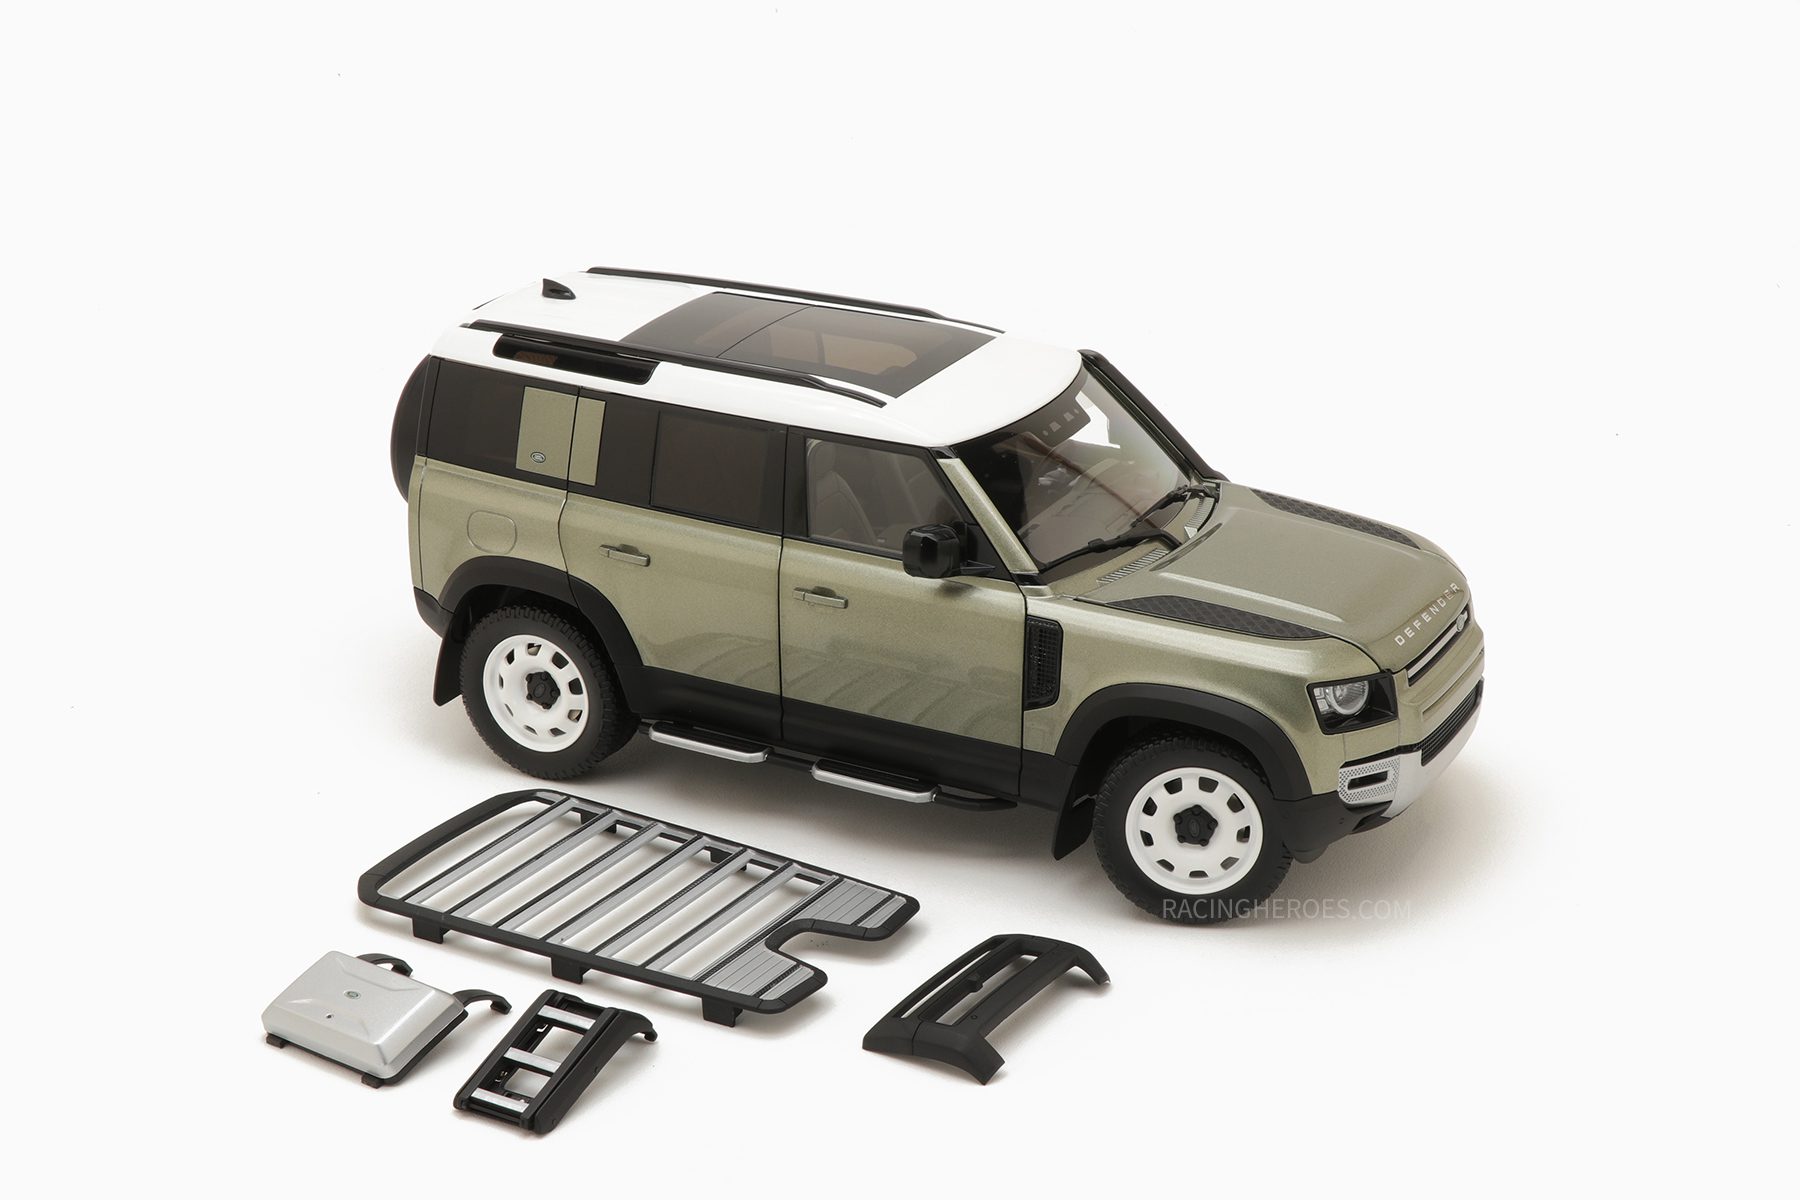 Defender real. Land Rover 110 1/18. Модель Land Rover Defender 110 - 2020 1 43 almost real. Новый ленд Ровер Дефендер 2020. Land Rover Defender New model 1.18 almost real.